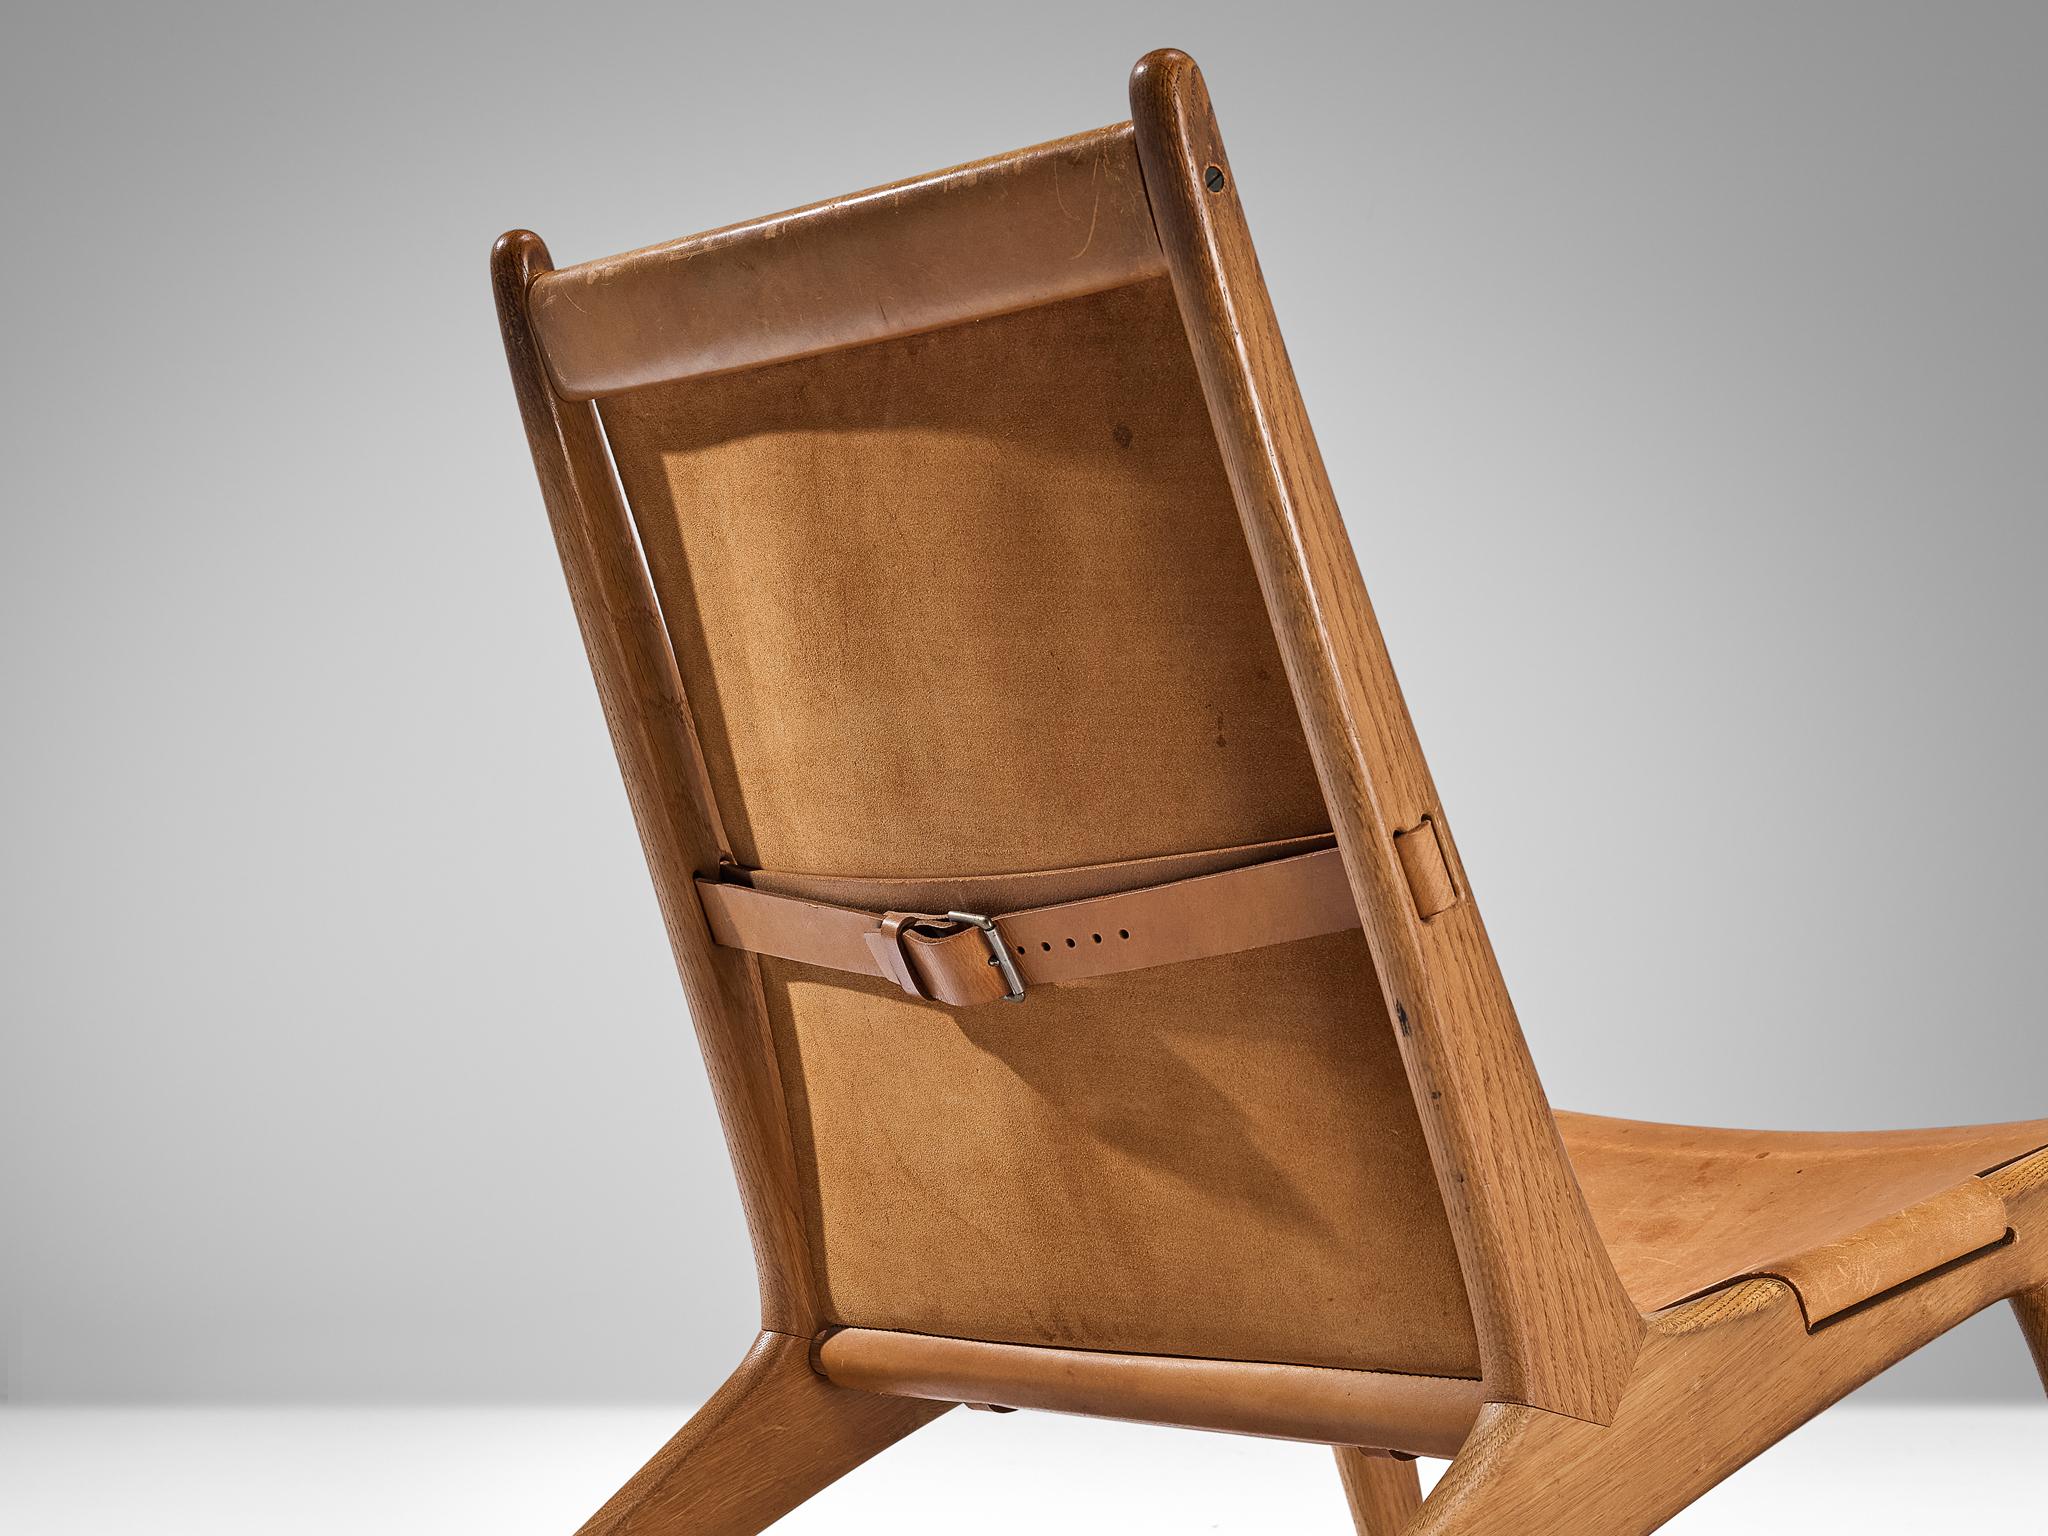 Uno & Östen Kristiansson for Luxus, hunting chair, model '204', leather, oak, Sweden, 1954

Swedish hunting chair designed by Uno & Östen Kristiansson in the fifties. This unique design has a very strong appearance. The sleek construction and thick